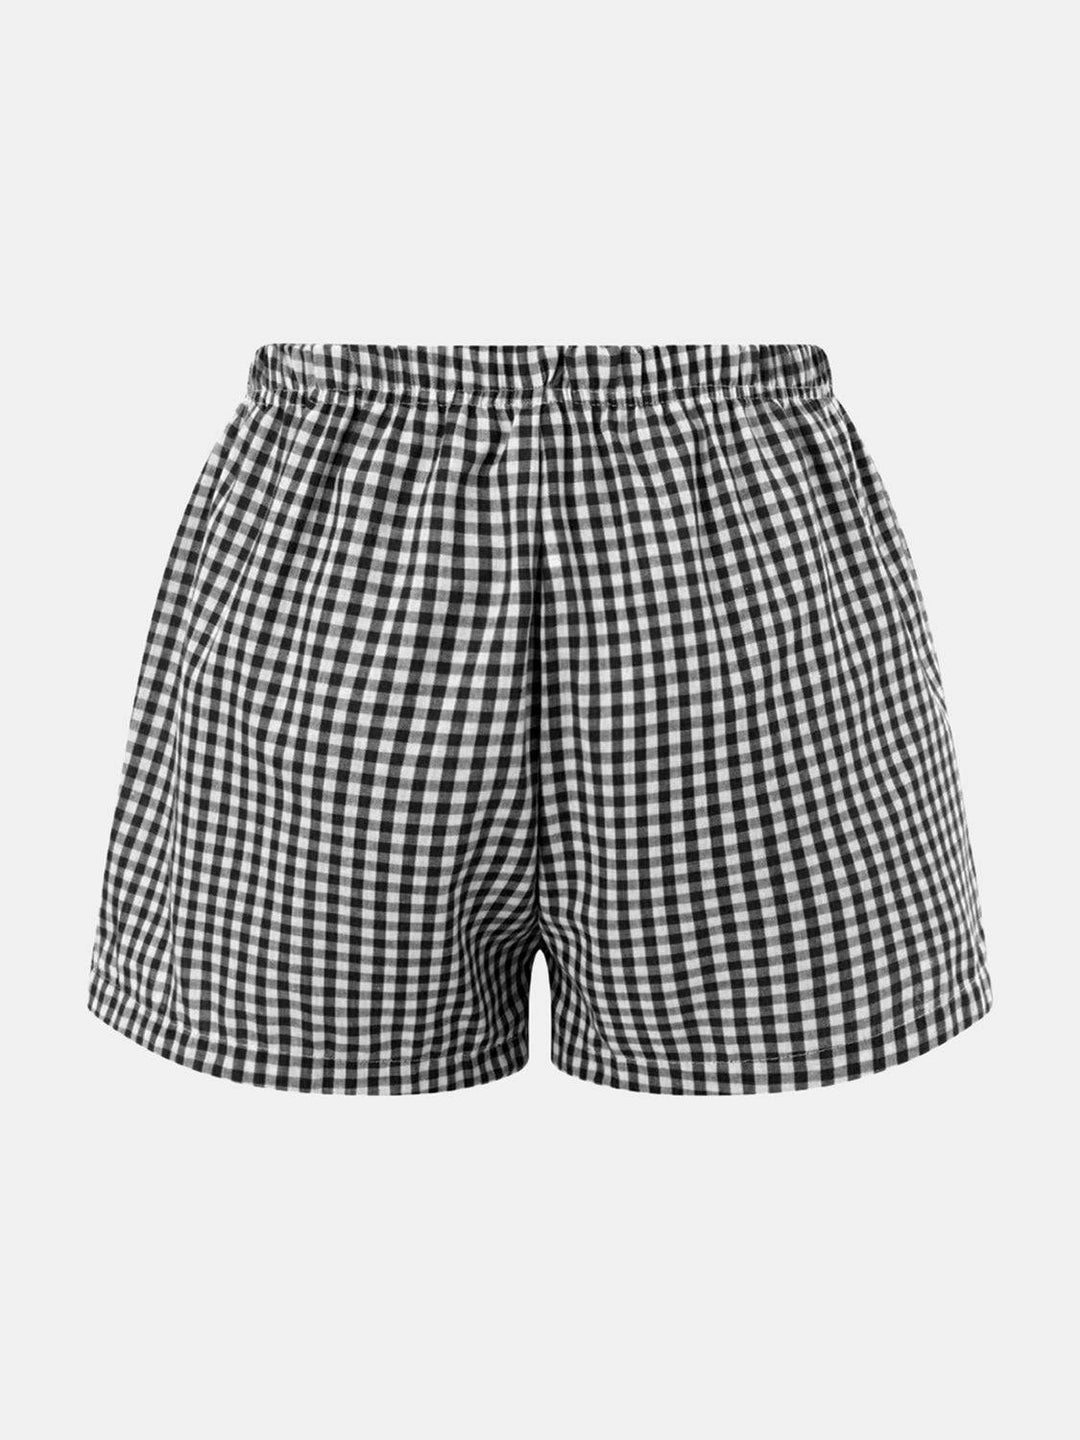 a black and white checkered shorts